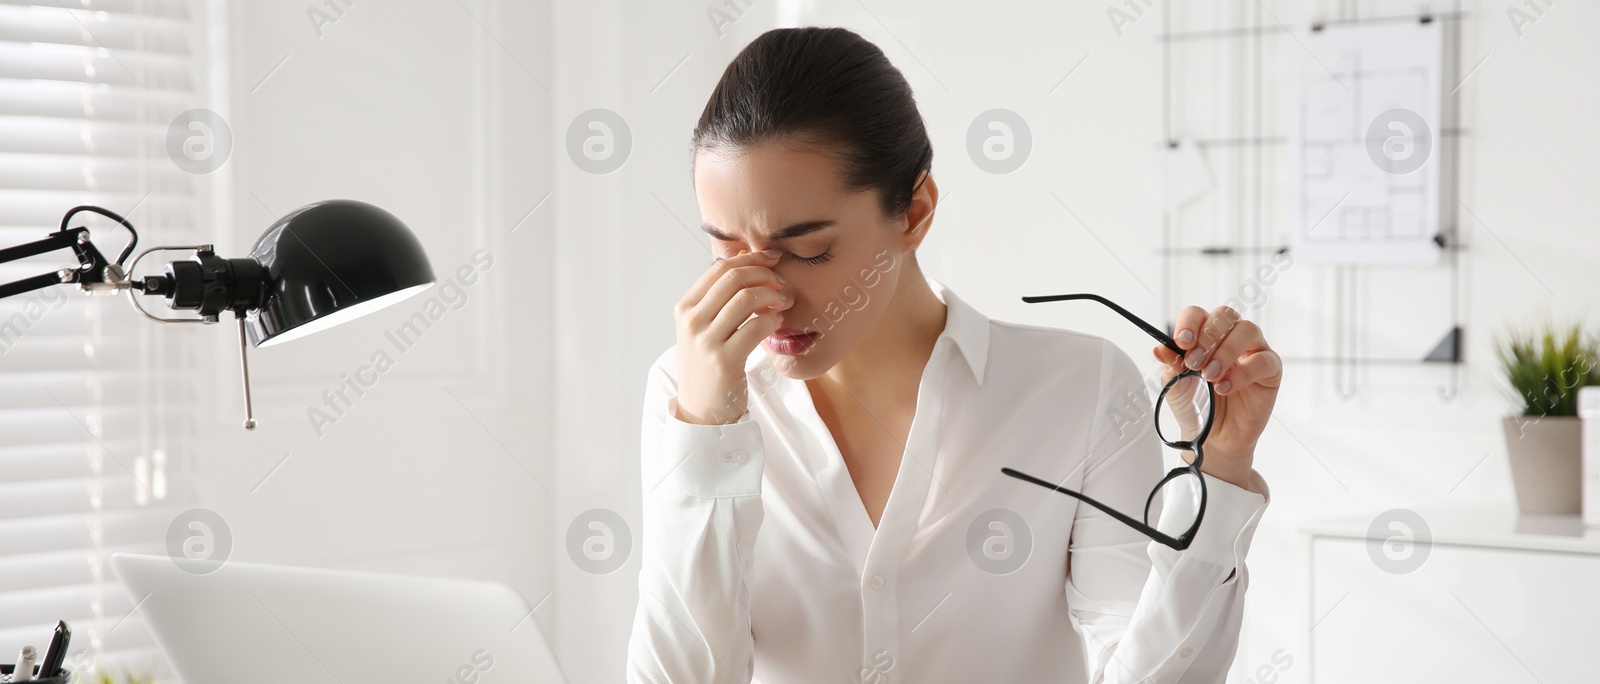 Image of Stressed and tired young woman with headache at workplace. Banner design